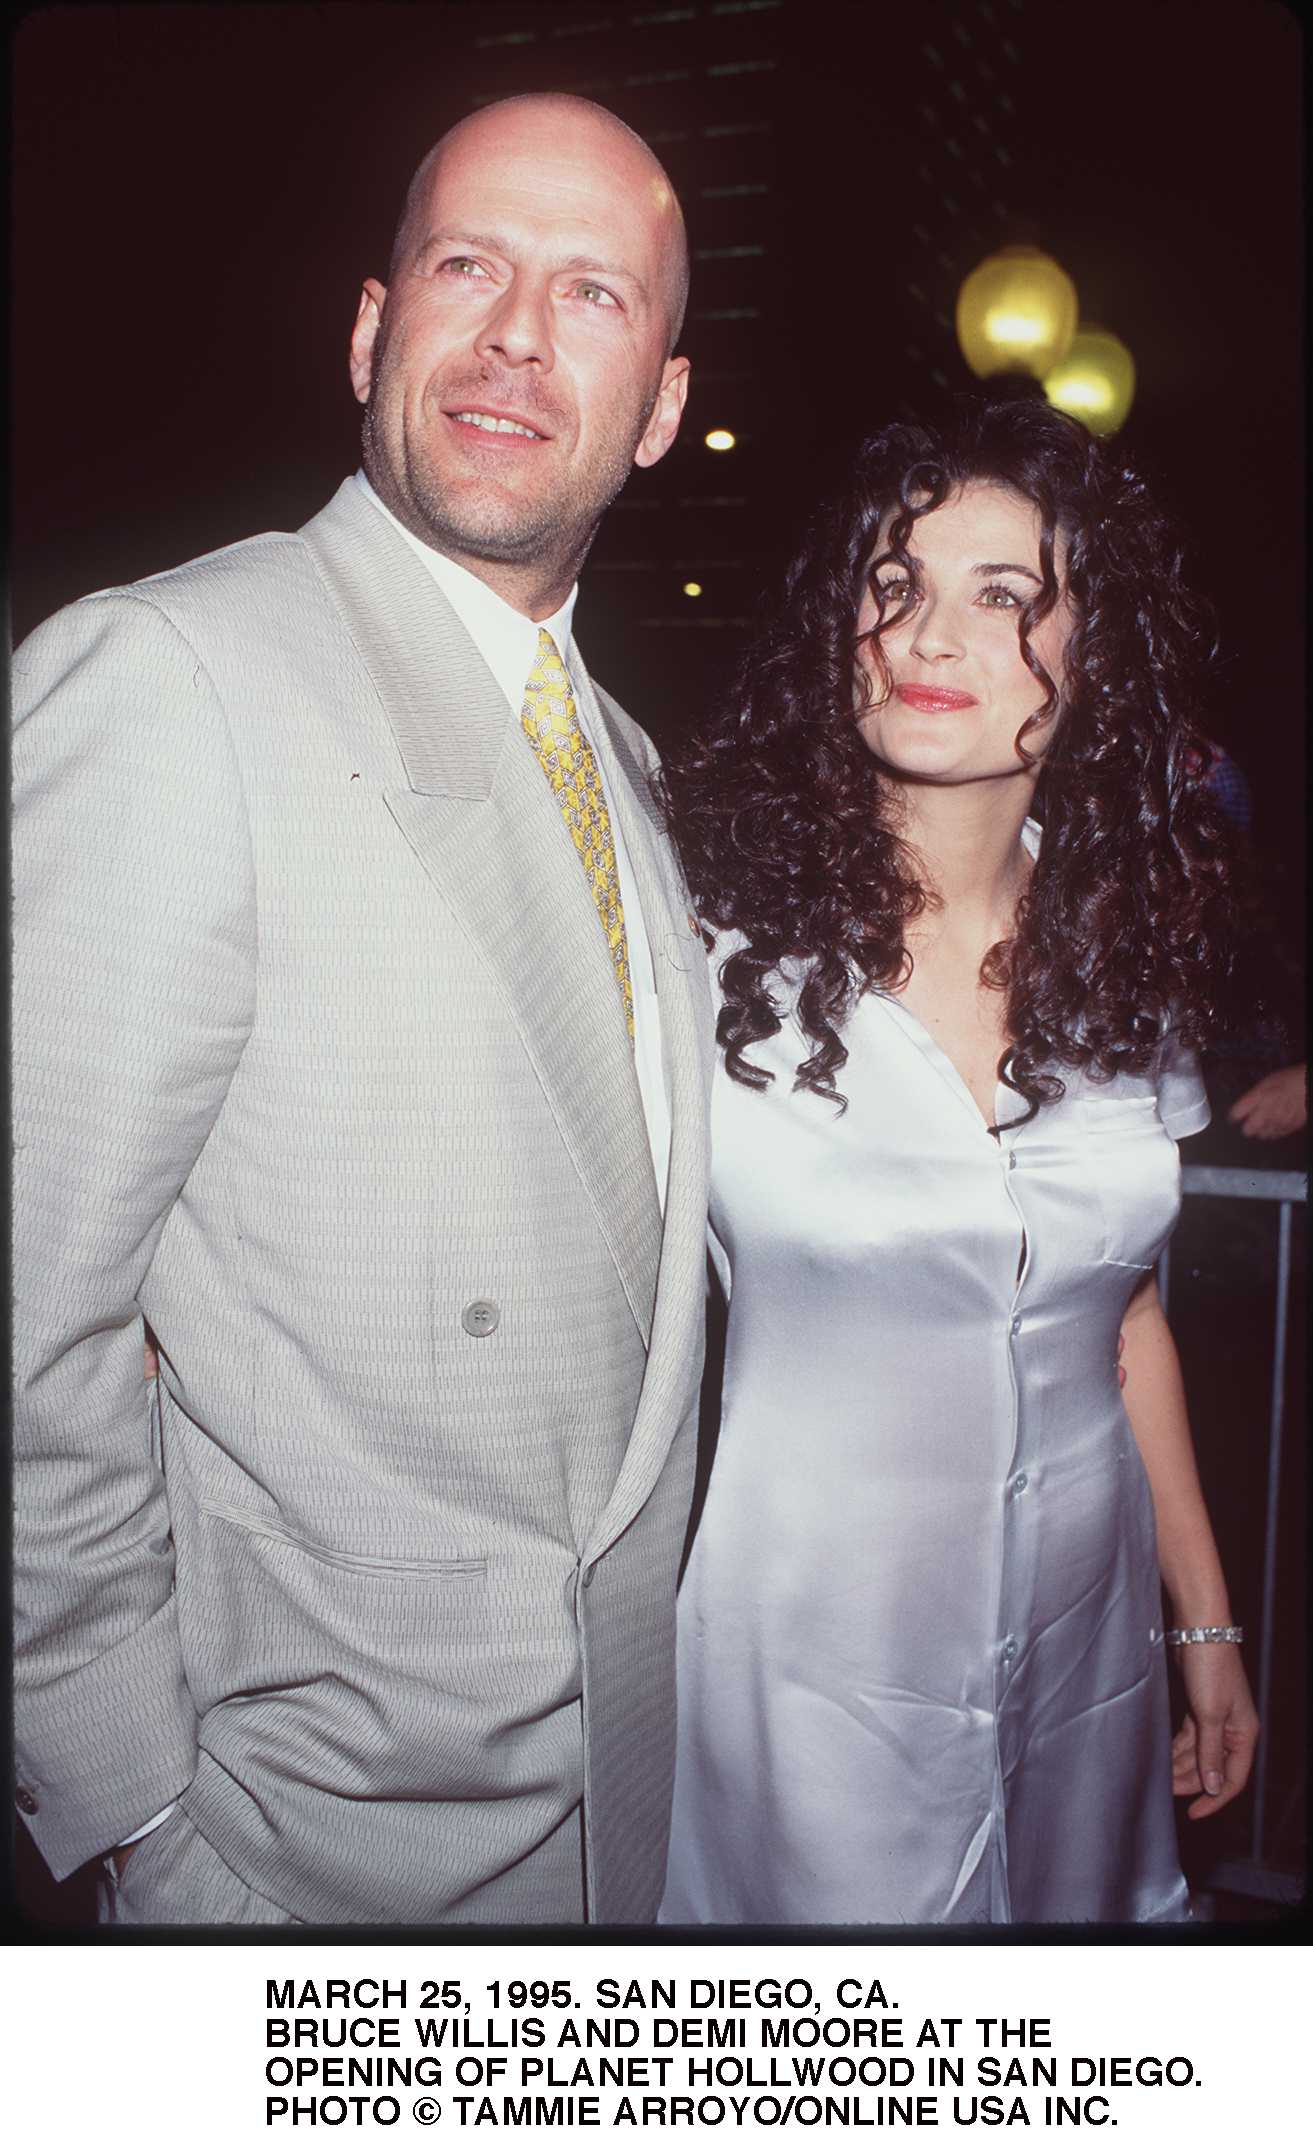 Bruce Willis and Demi Moore at the opening of Planet Hollywood in San Diego, California, on March 25, 1995. | Source: Getty Images